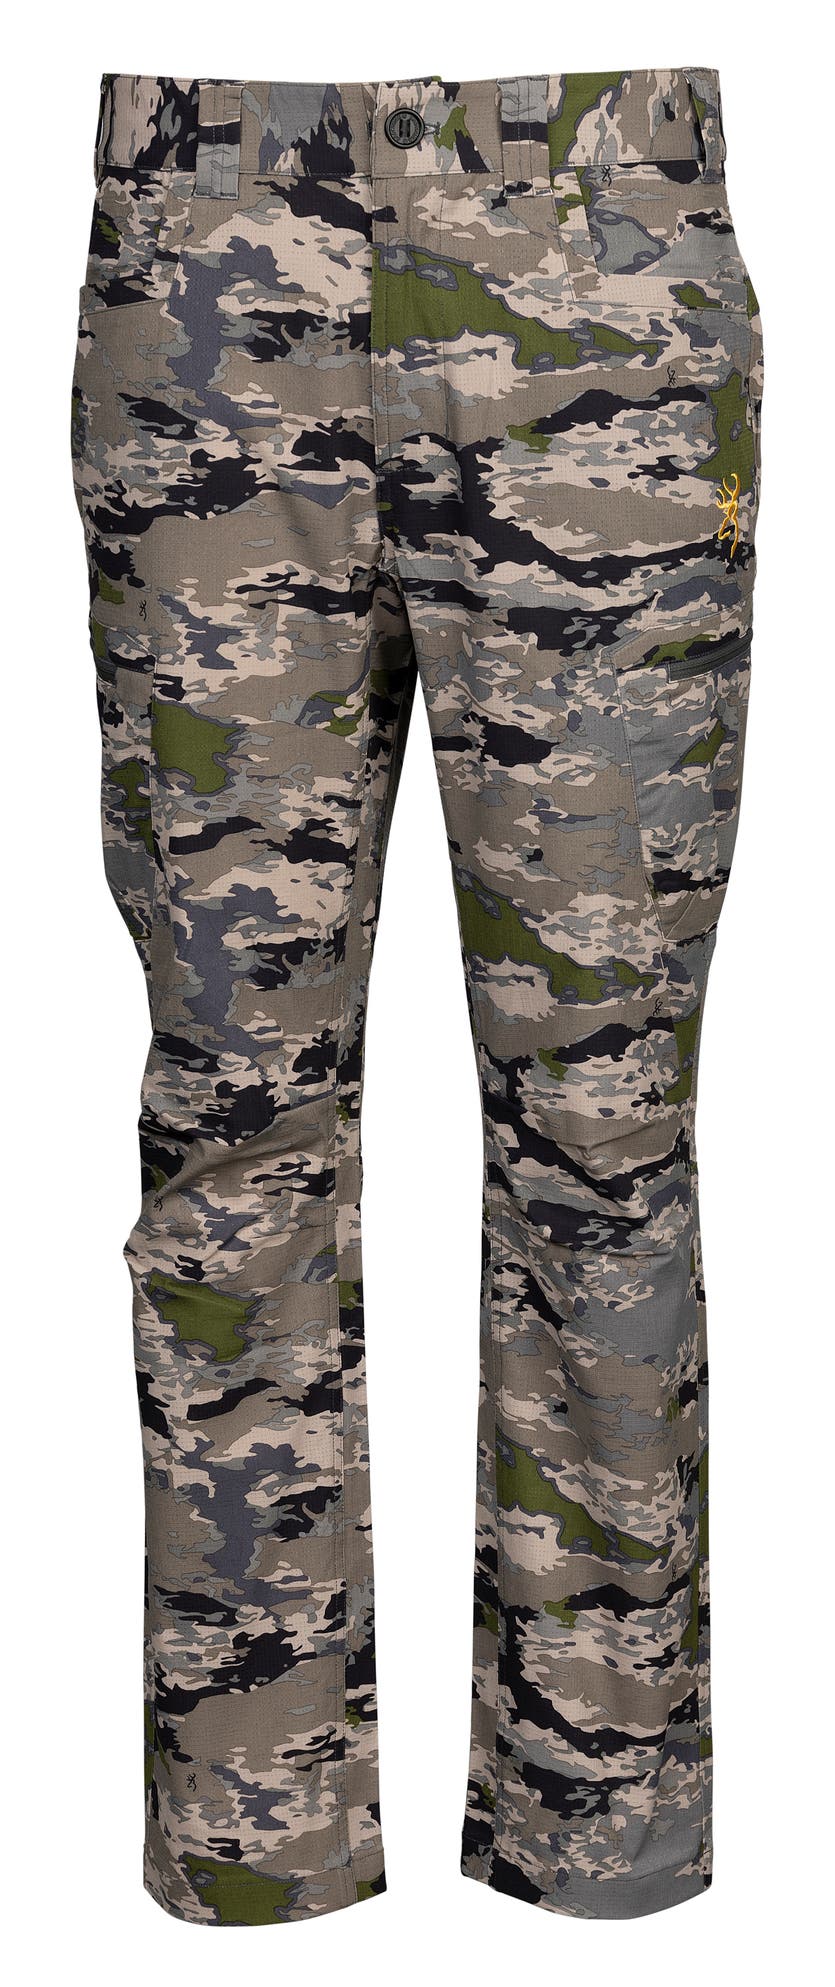 https://www.browning.com/content/dam/browning/product/clothing/2023/early-season-pant/early-season-pant-ovix-30205634-1.jpg?width=835&auto=webp&quality=75